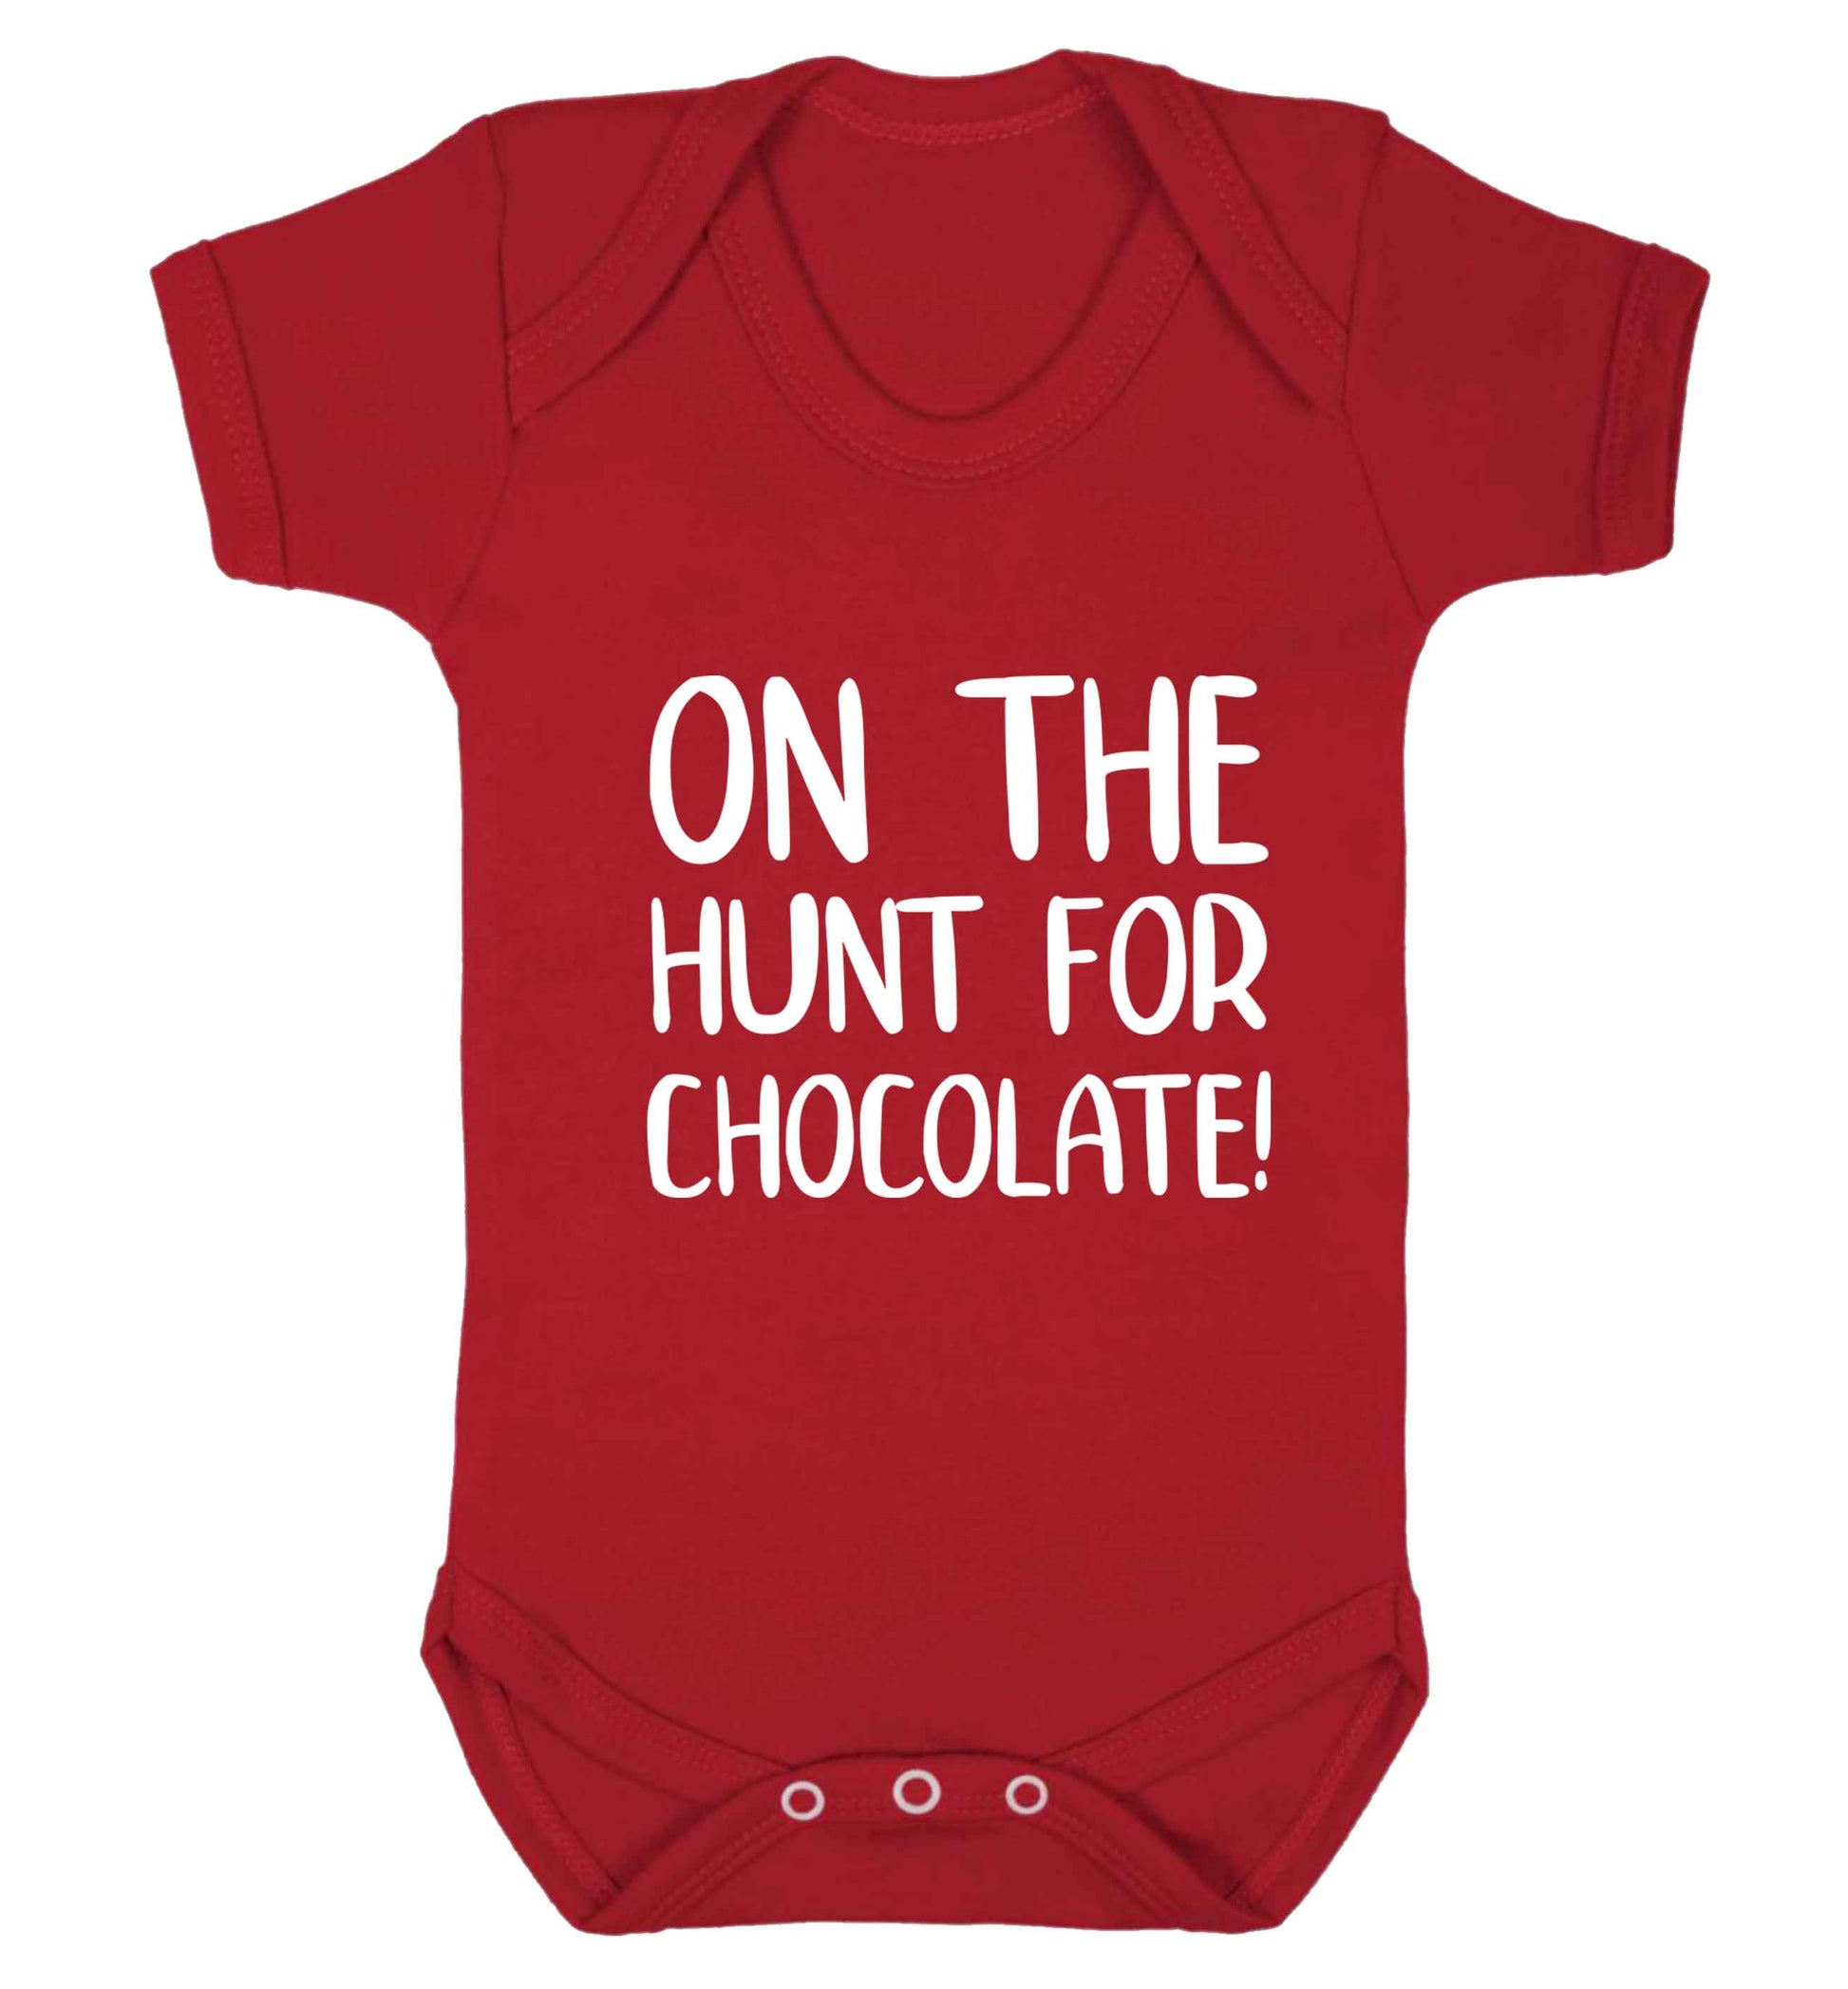 On the hunt for chocolate! baby vest red 18-24 months